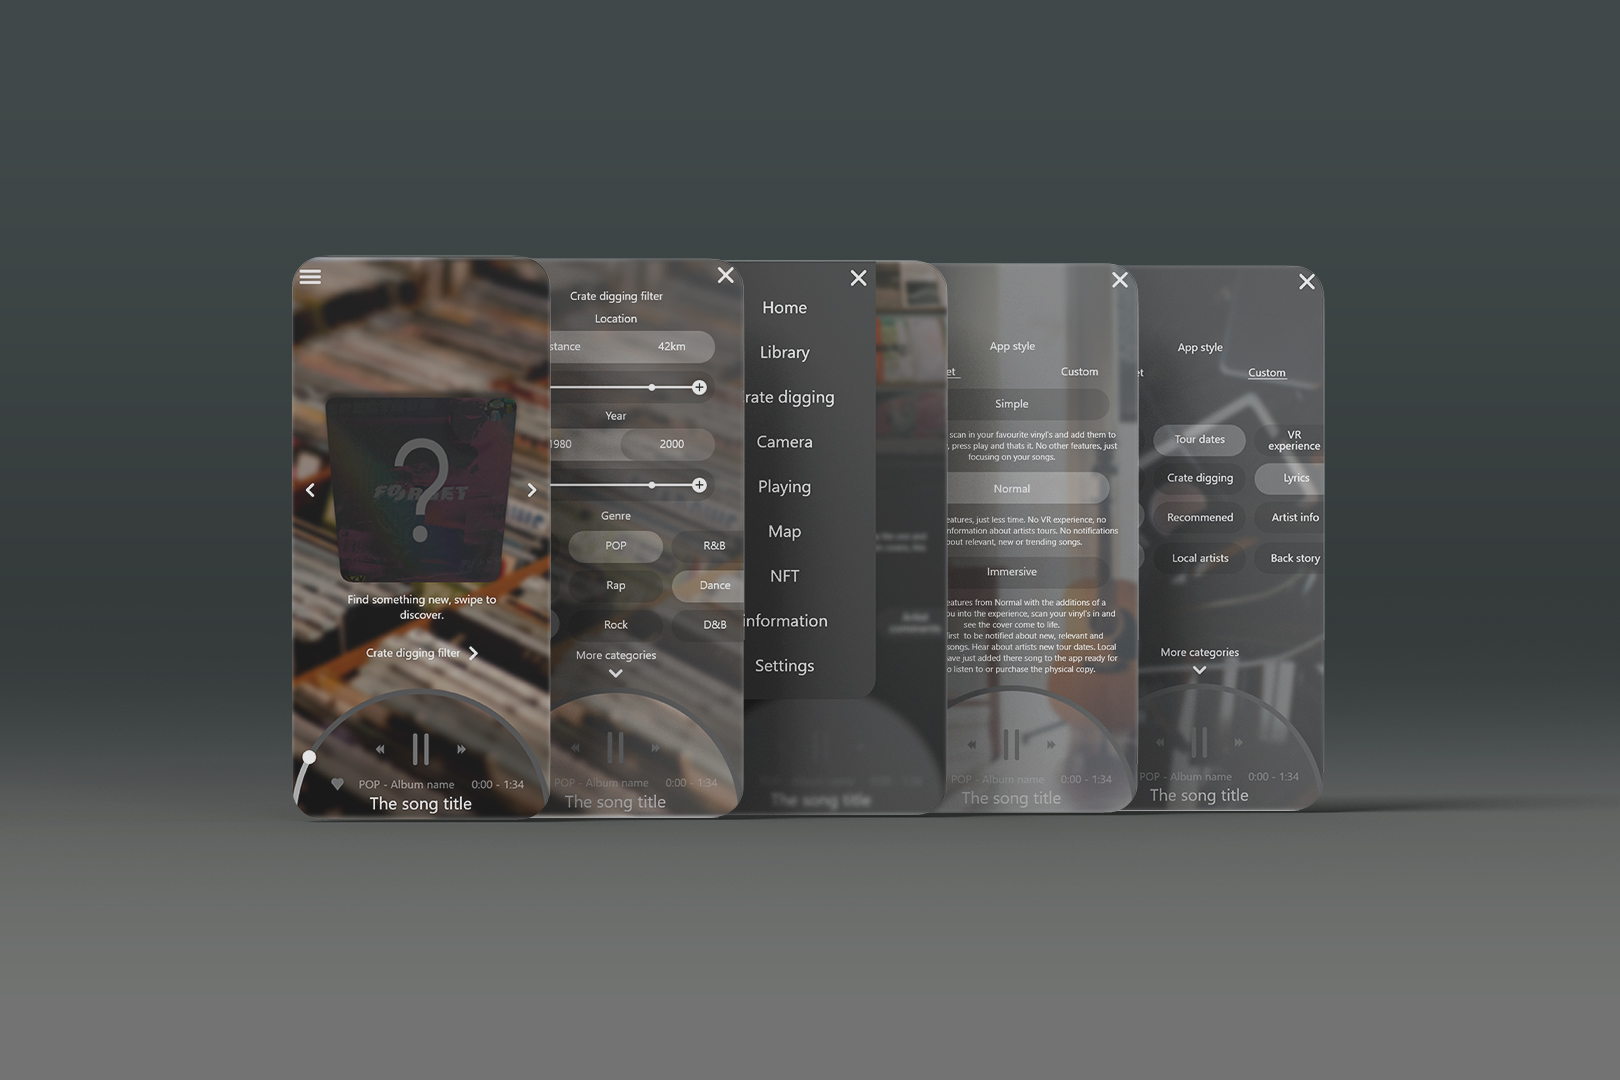 The app design is simple and packed with loads of content to help drive the user and their experience with vinyl records.